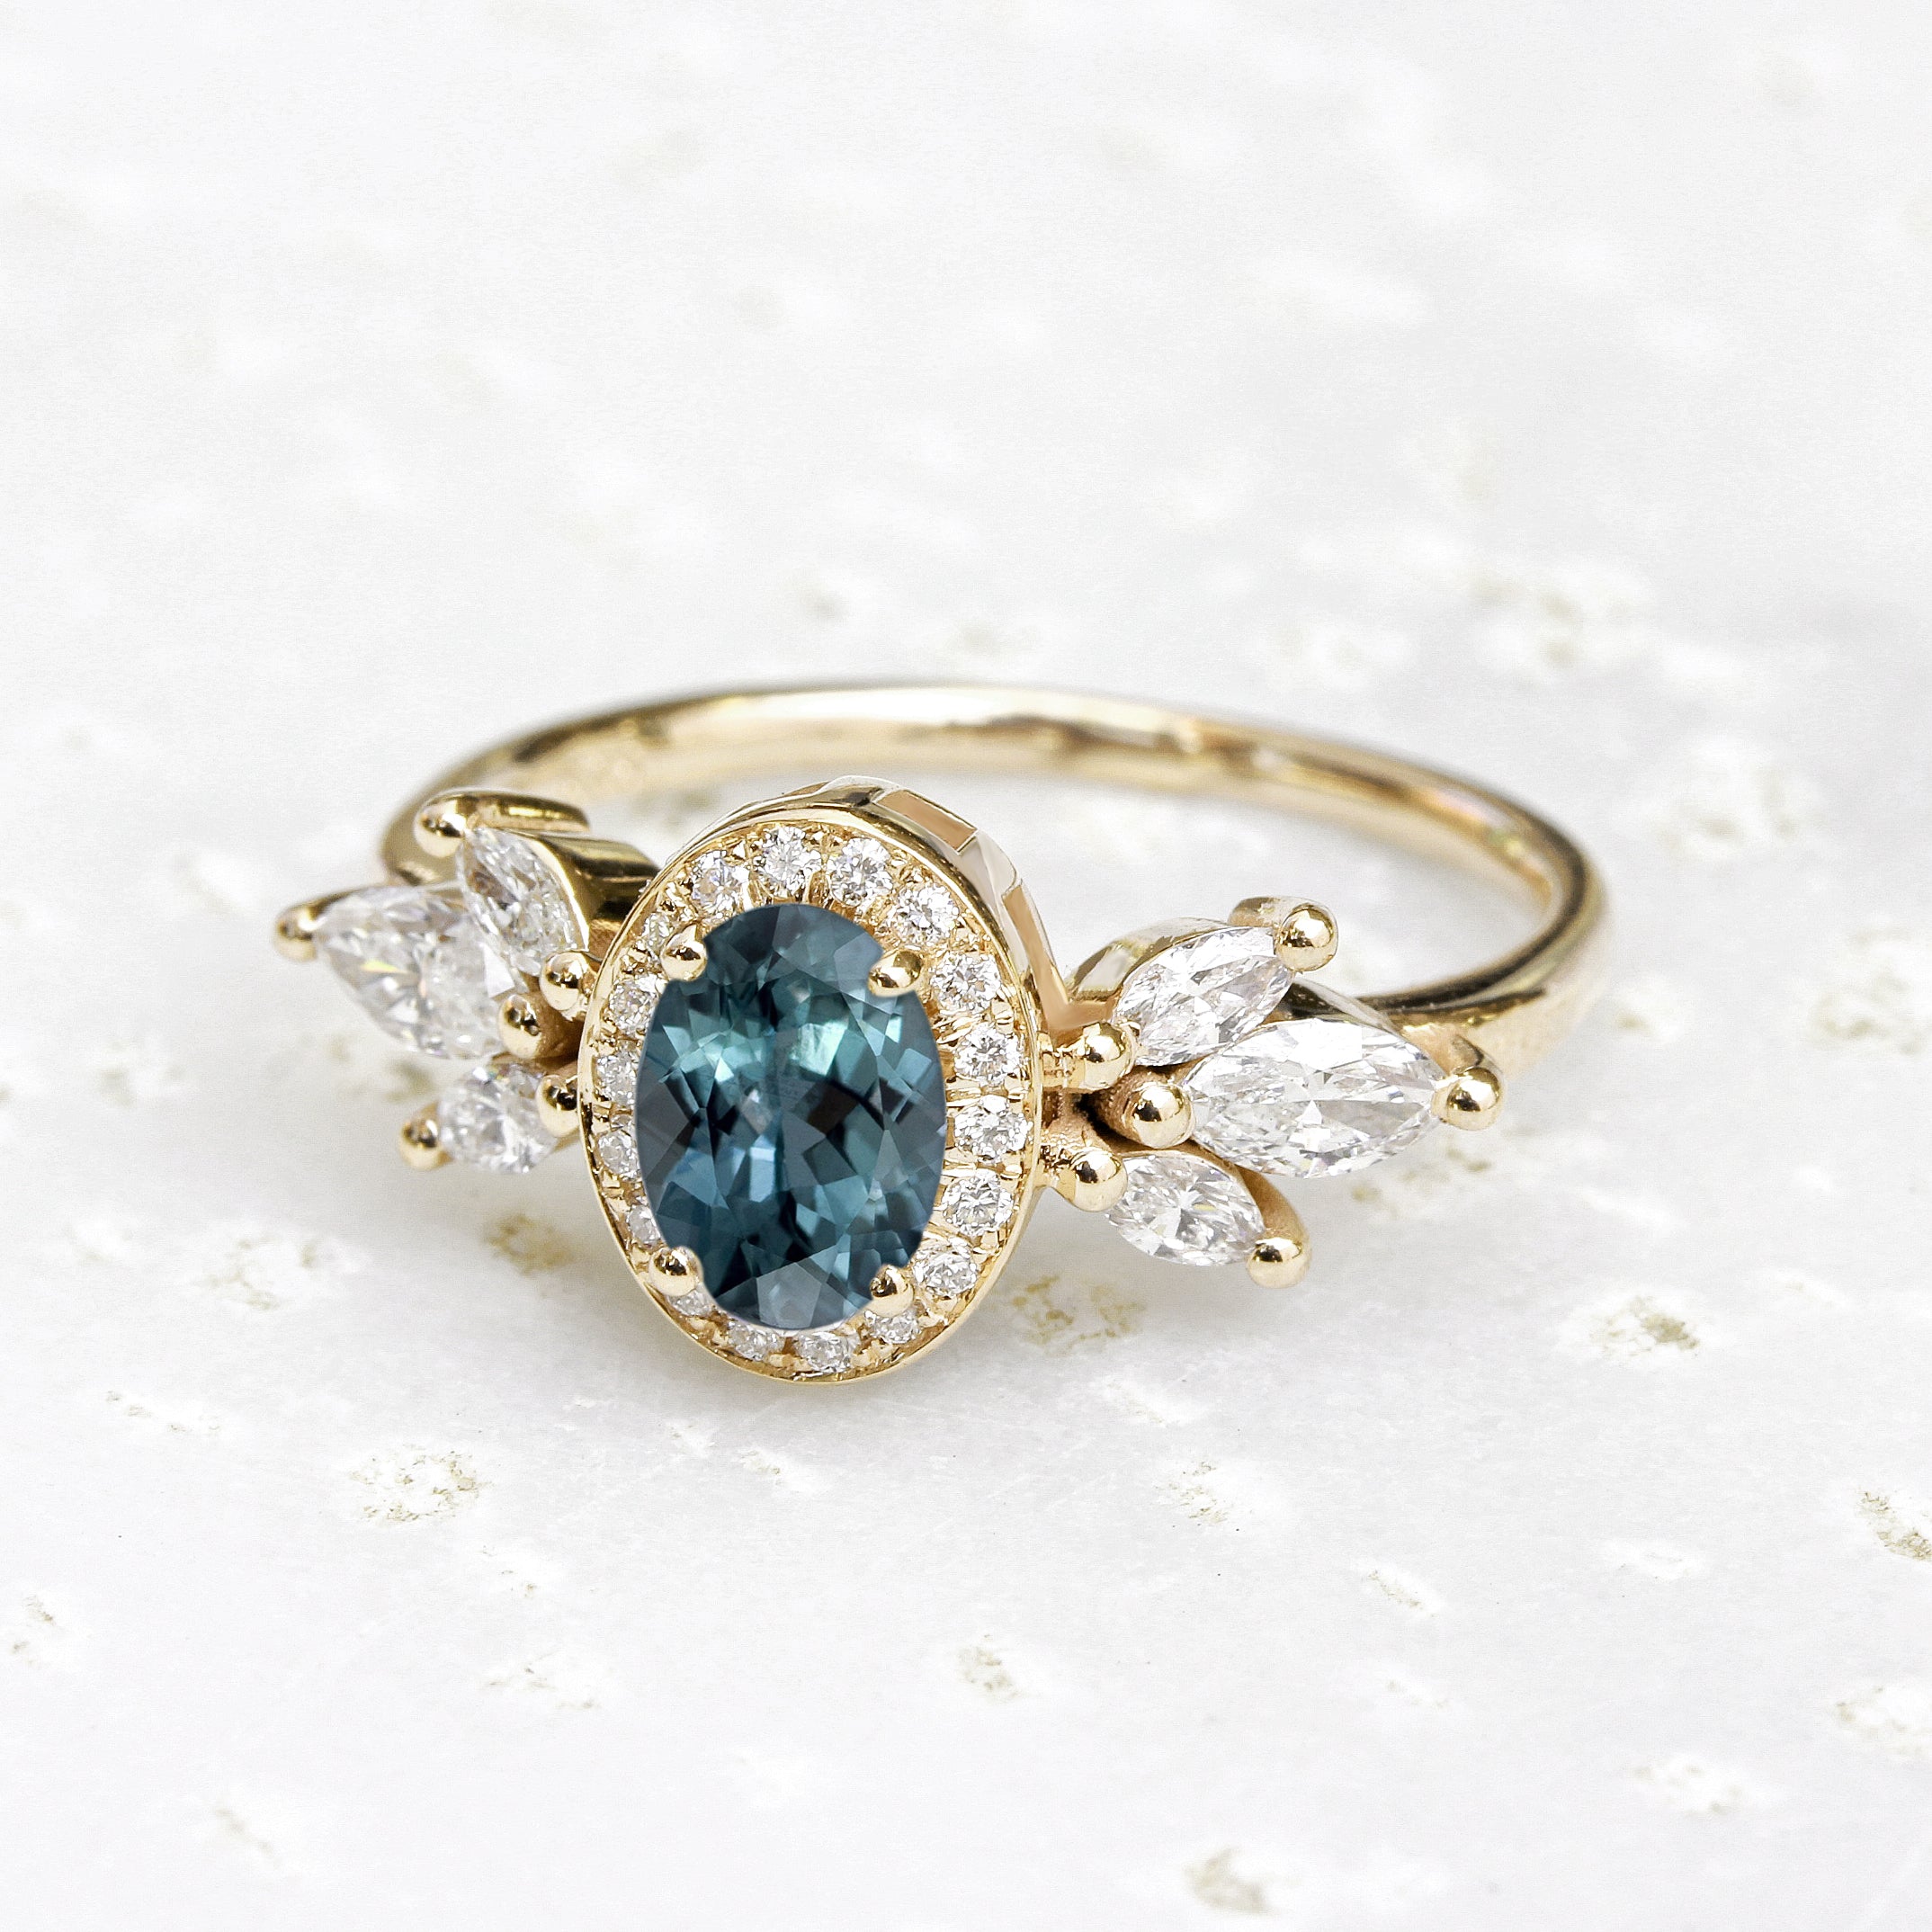 Oval teal sapphire art deco engagement ring - Athena